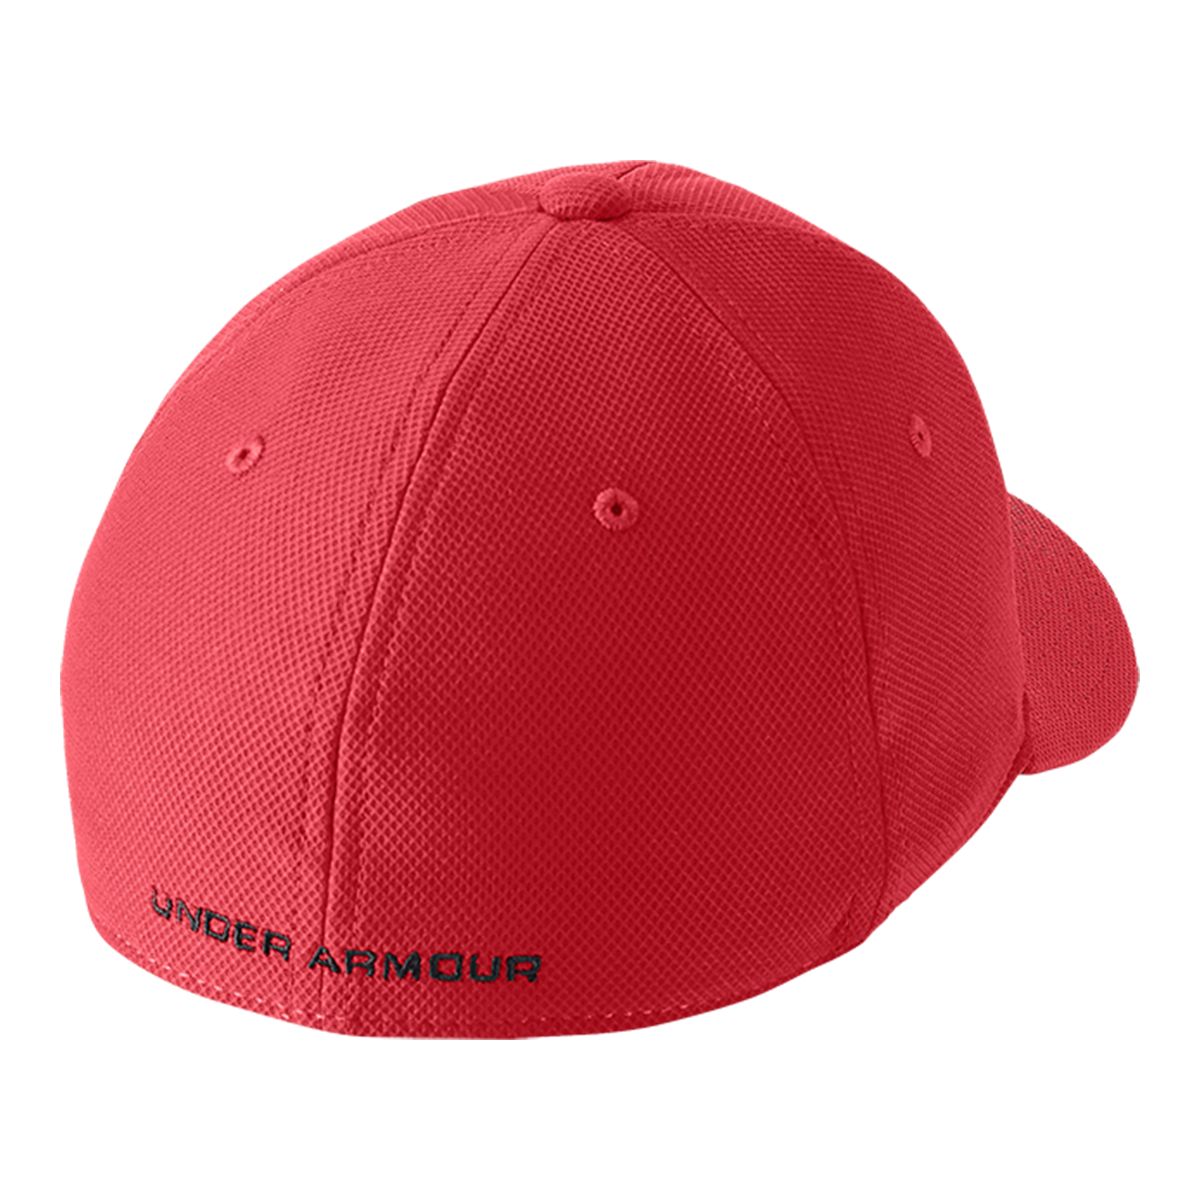 https://media-www.sportchek.ca/product/div-03-softgoods/dpt-79-clothing-accessories/sdpt-03-boys/332428576/under-armour-boys-blitzing-3-0-stretch-cap-e333129e-cc05-41f2-a661-631ed06a5aa1-jpgrendition.jpg?imdensity=1&imwidth=1244&impolicy=mZoom